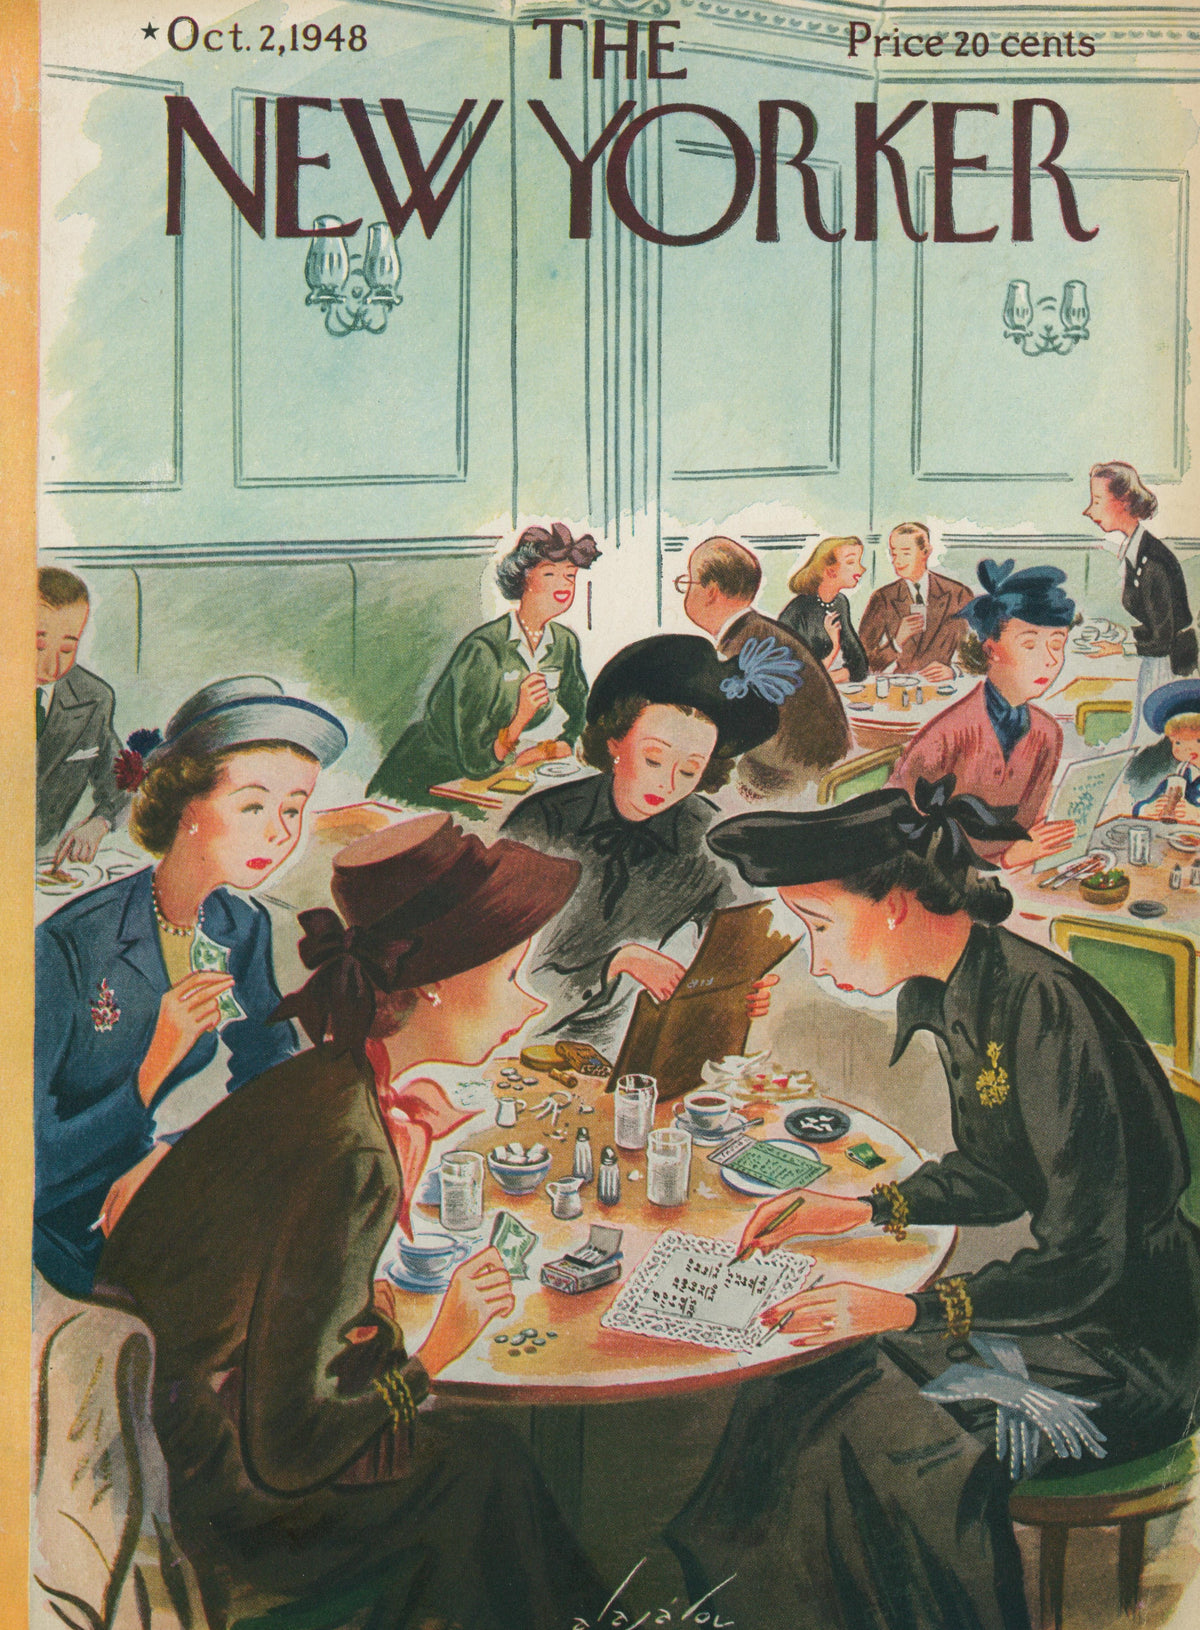 Dinner Time Madams- The New Yorker - Authentic Vintage Antique Print